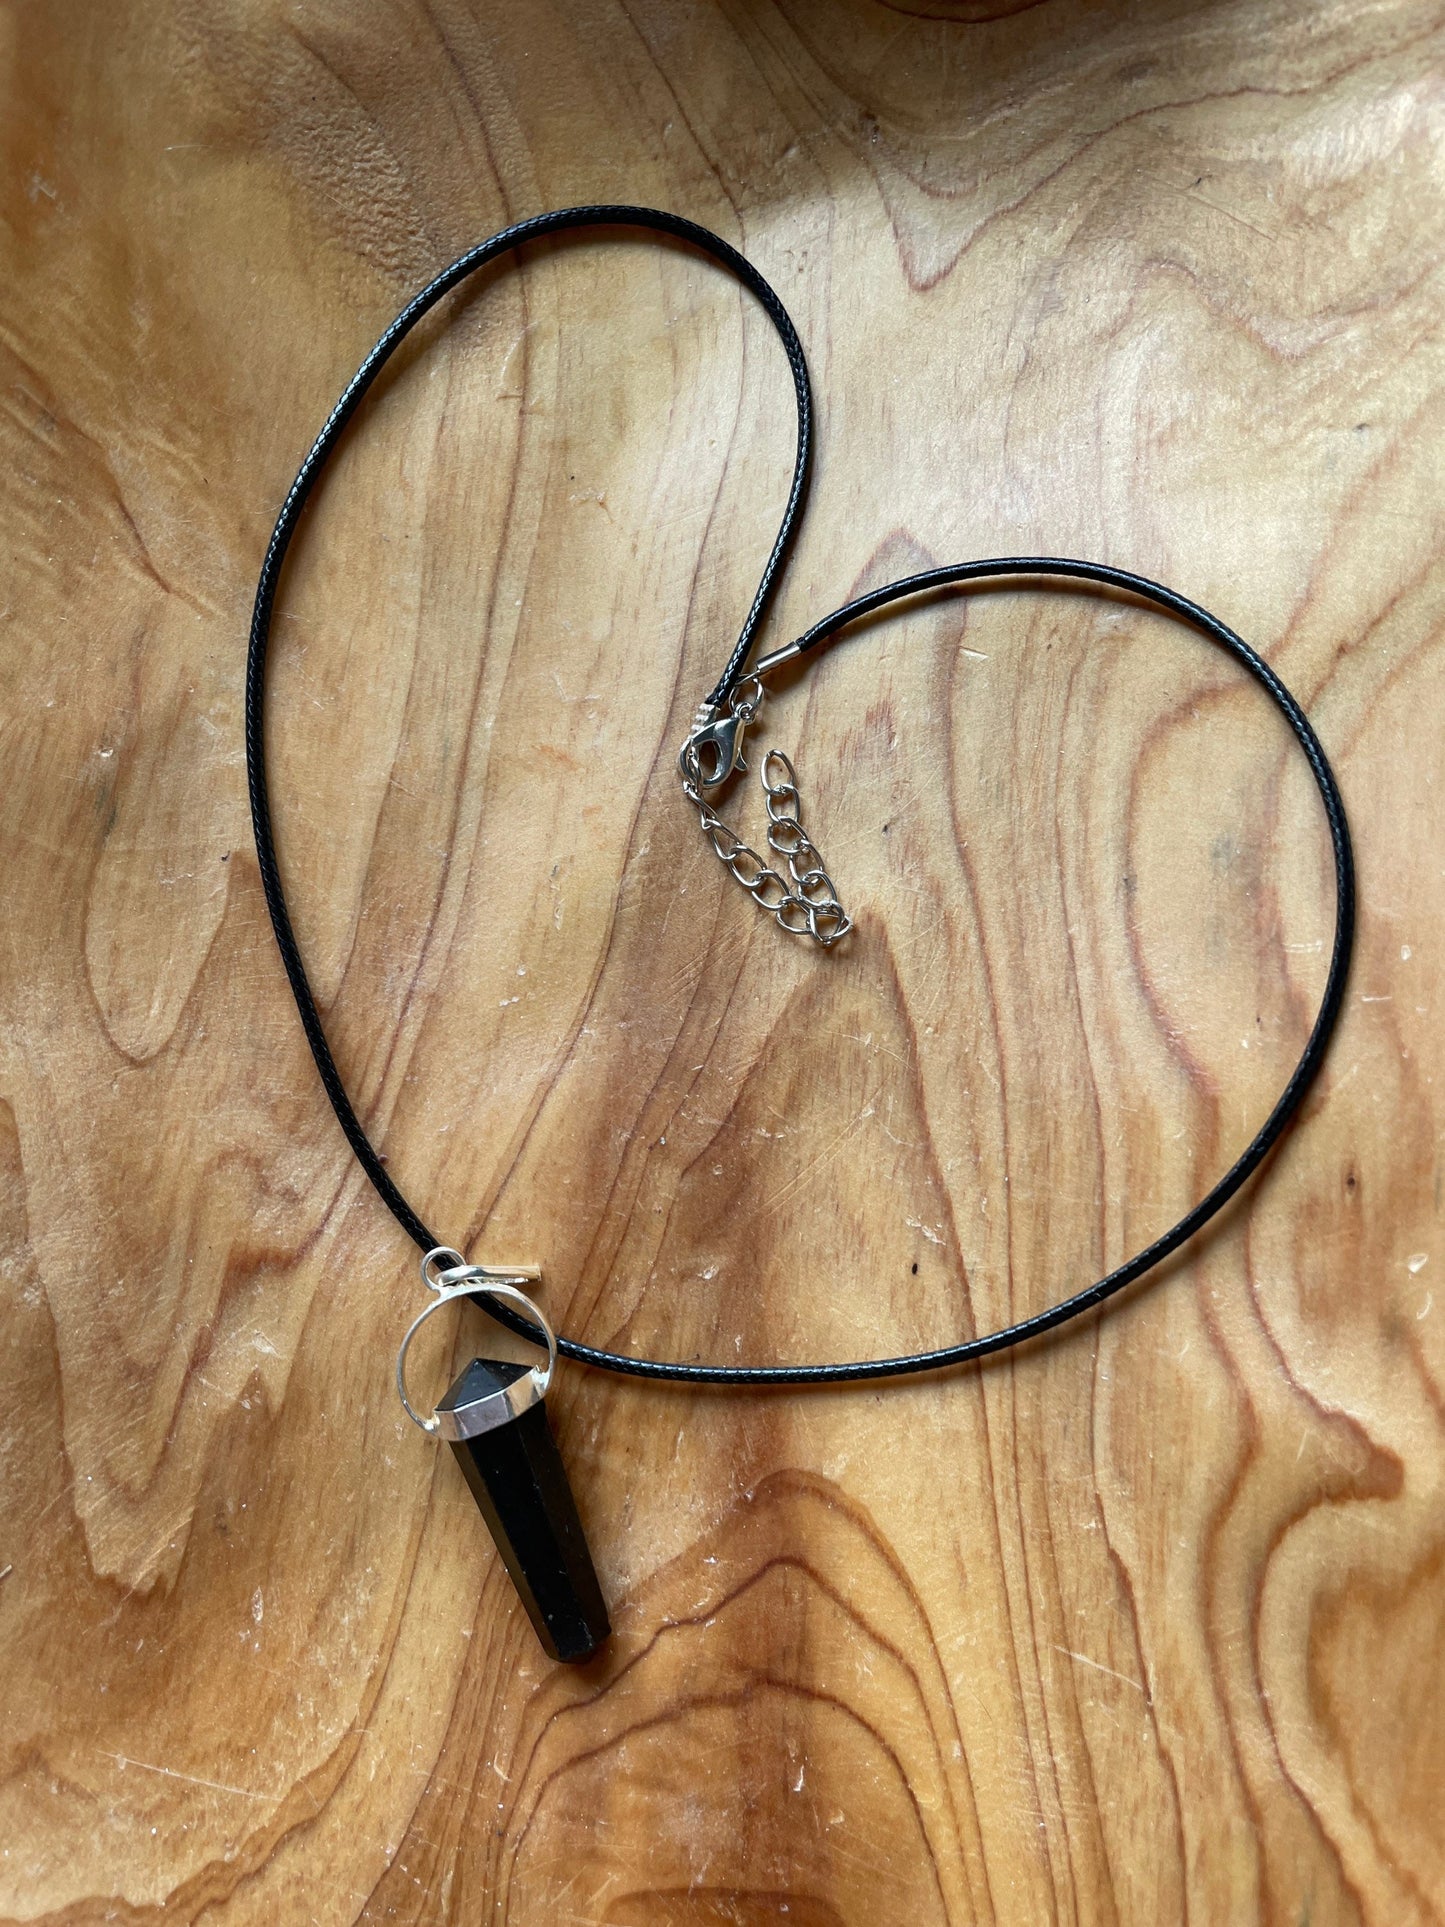 Beautiful black obsidian pendant on a black cord attached with silver wire